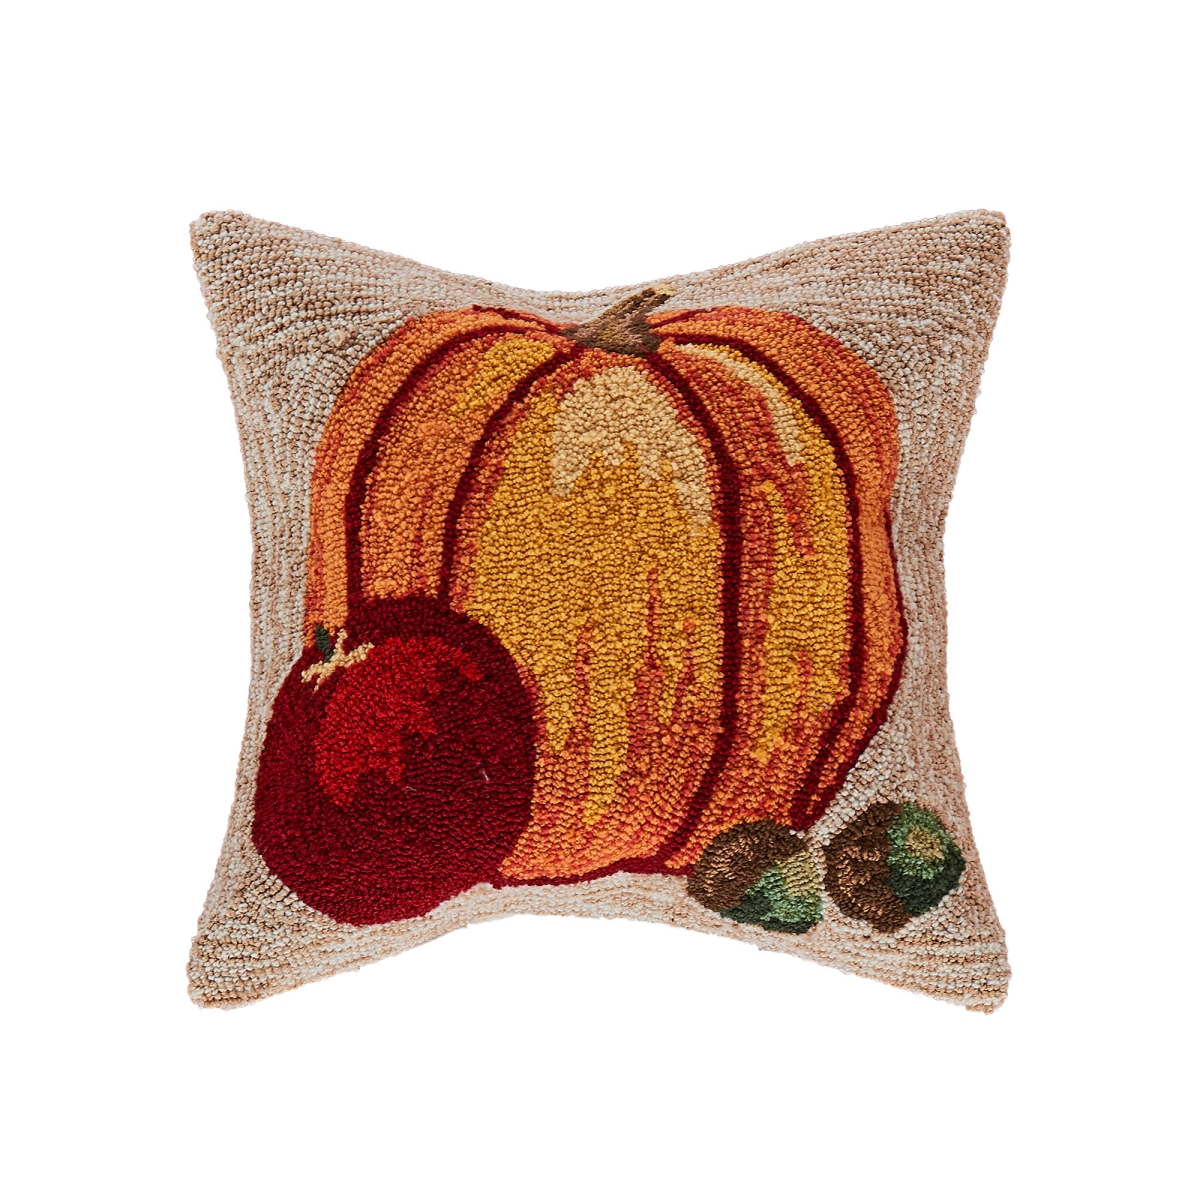 Trans-ocean Imports 7fp8s439512 18 In. Square Liora Manne Frontporch Harvest Pumpkin Indoor & Outdoor Hand Tufted Pillow - Neutral